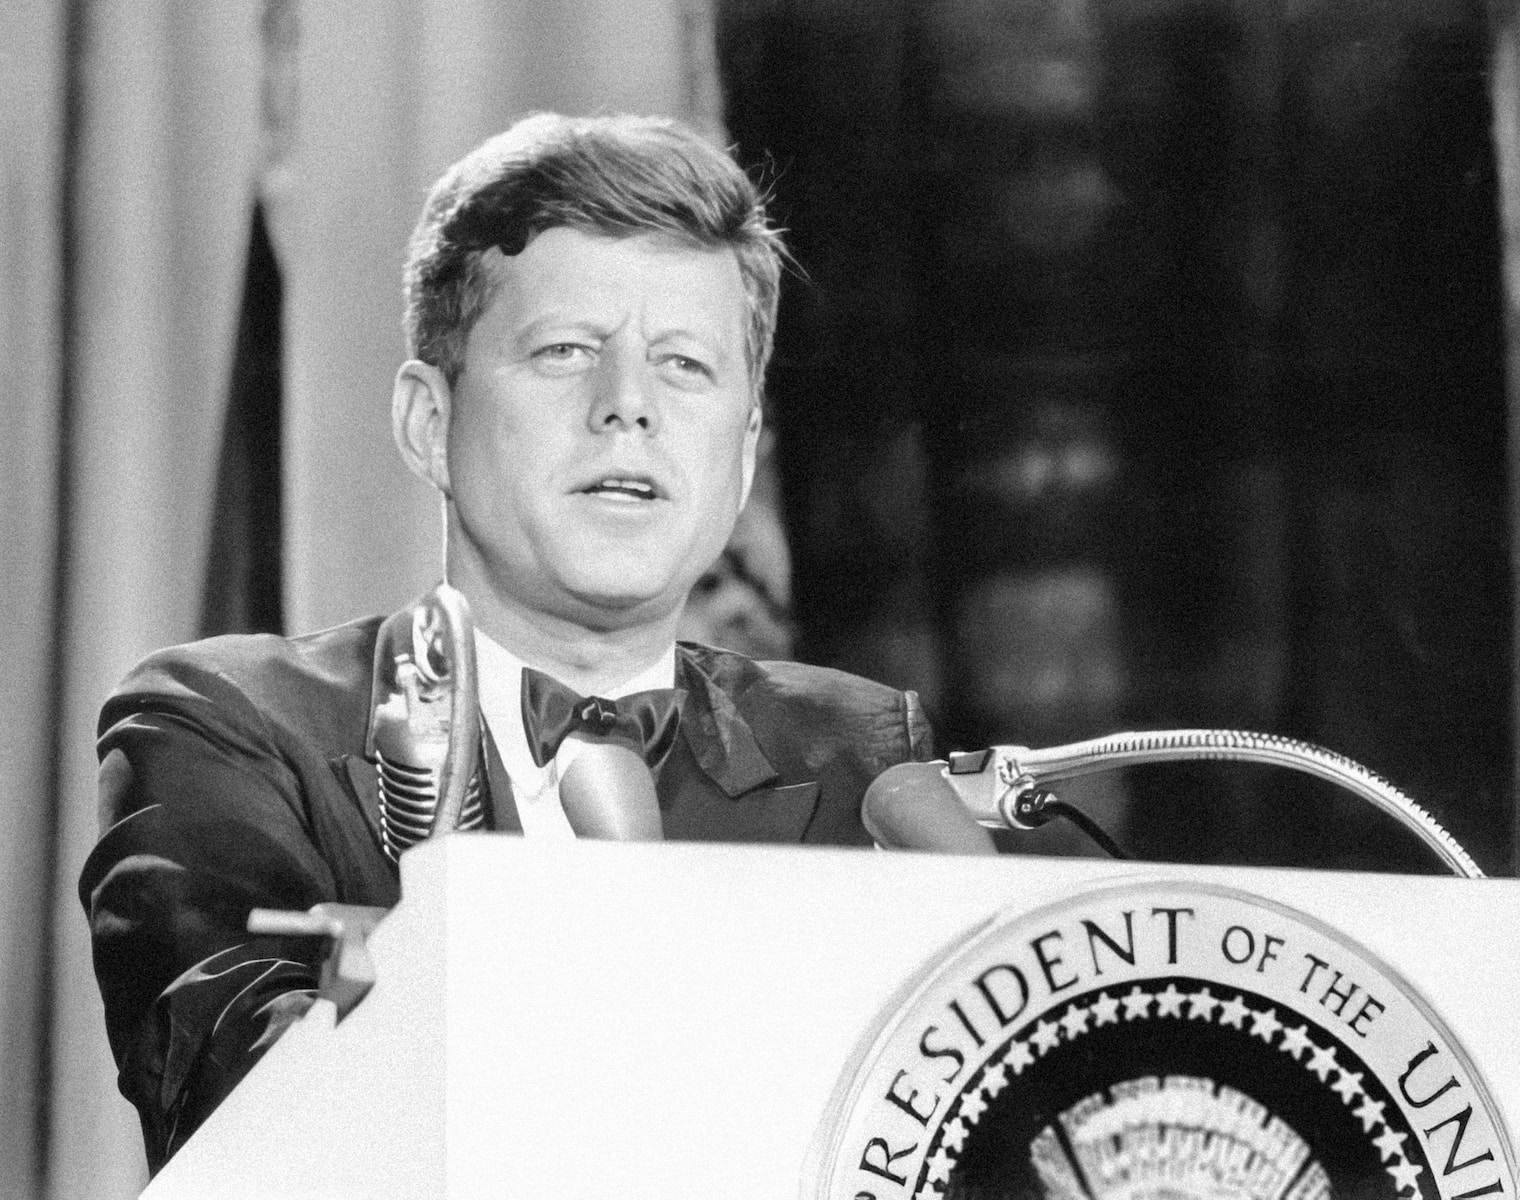 John F Kennedy, a man in a suit and tie standing at a podium